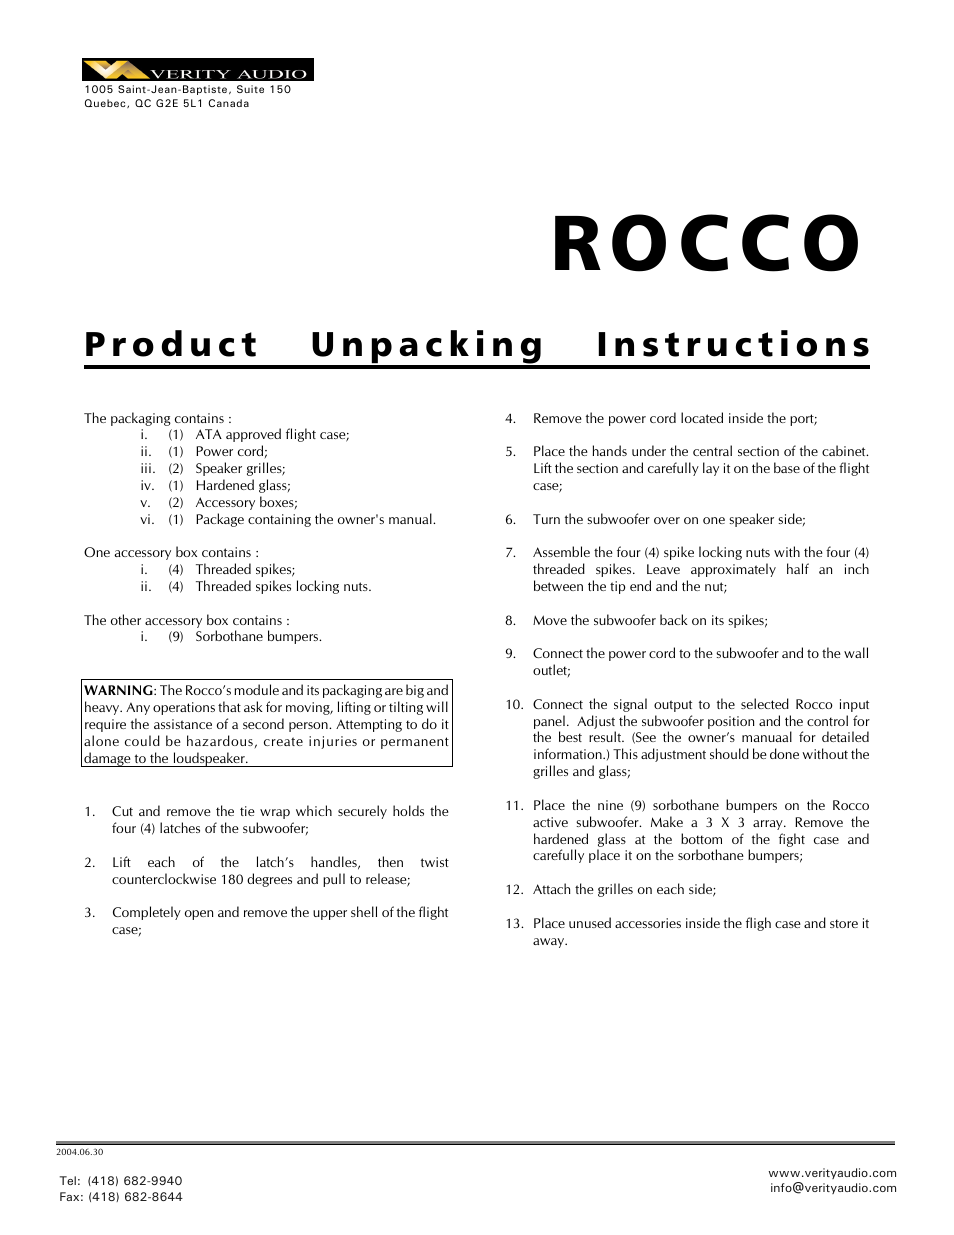 Rocco - Packing / Unpacking Instructions